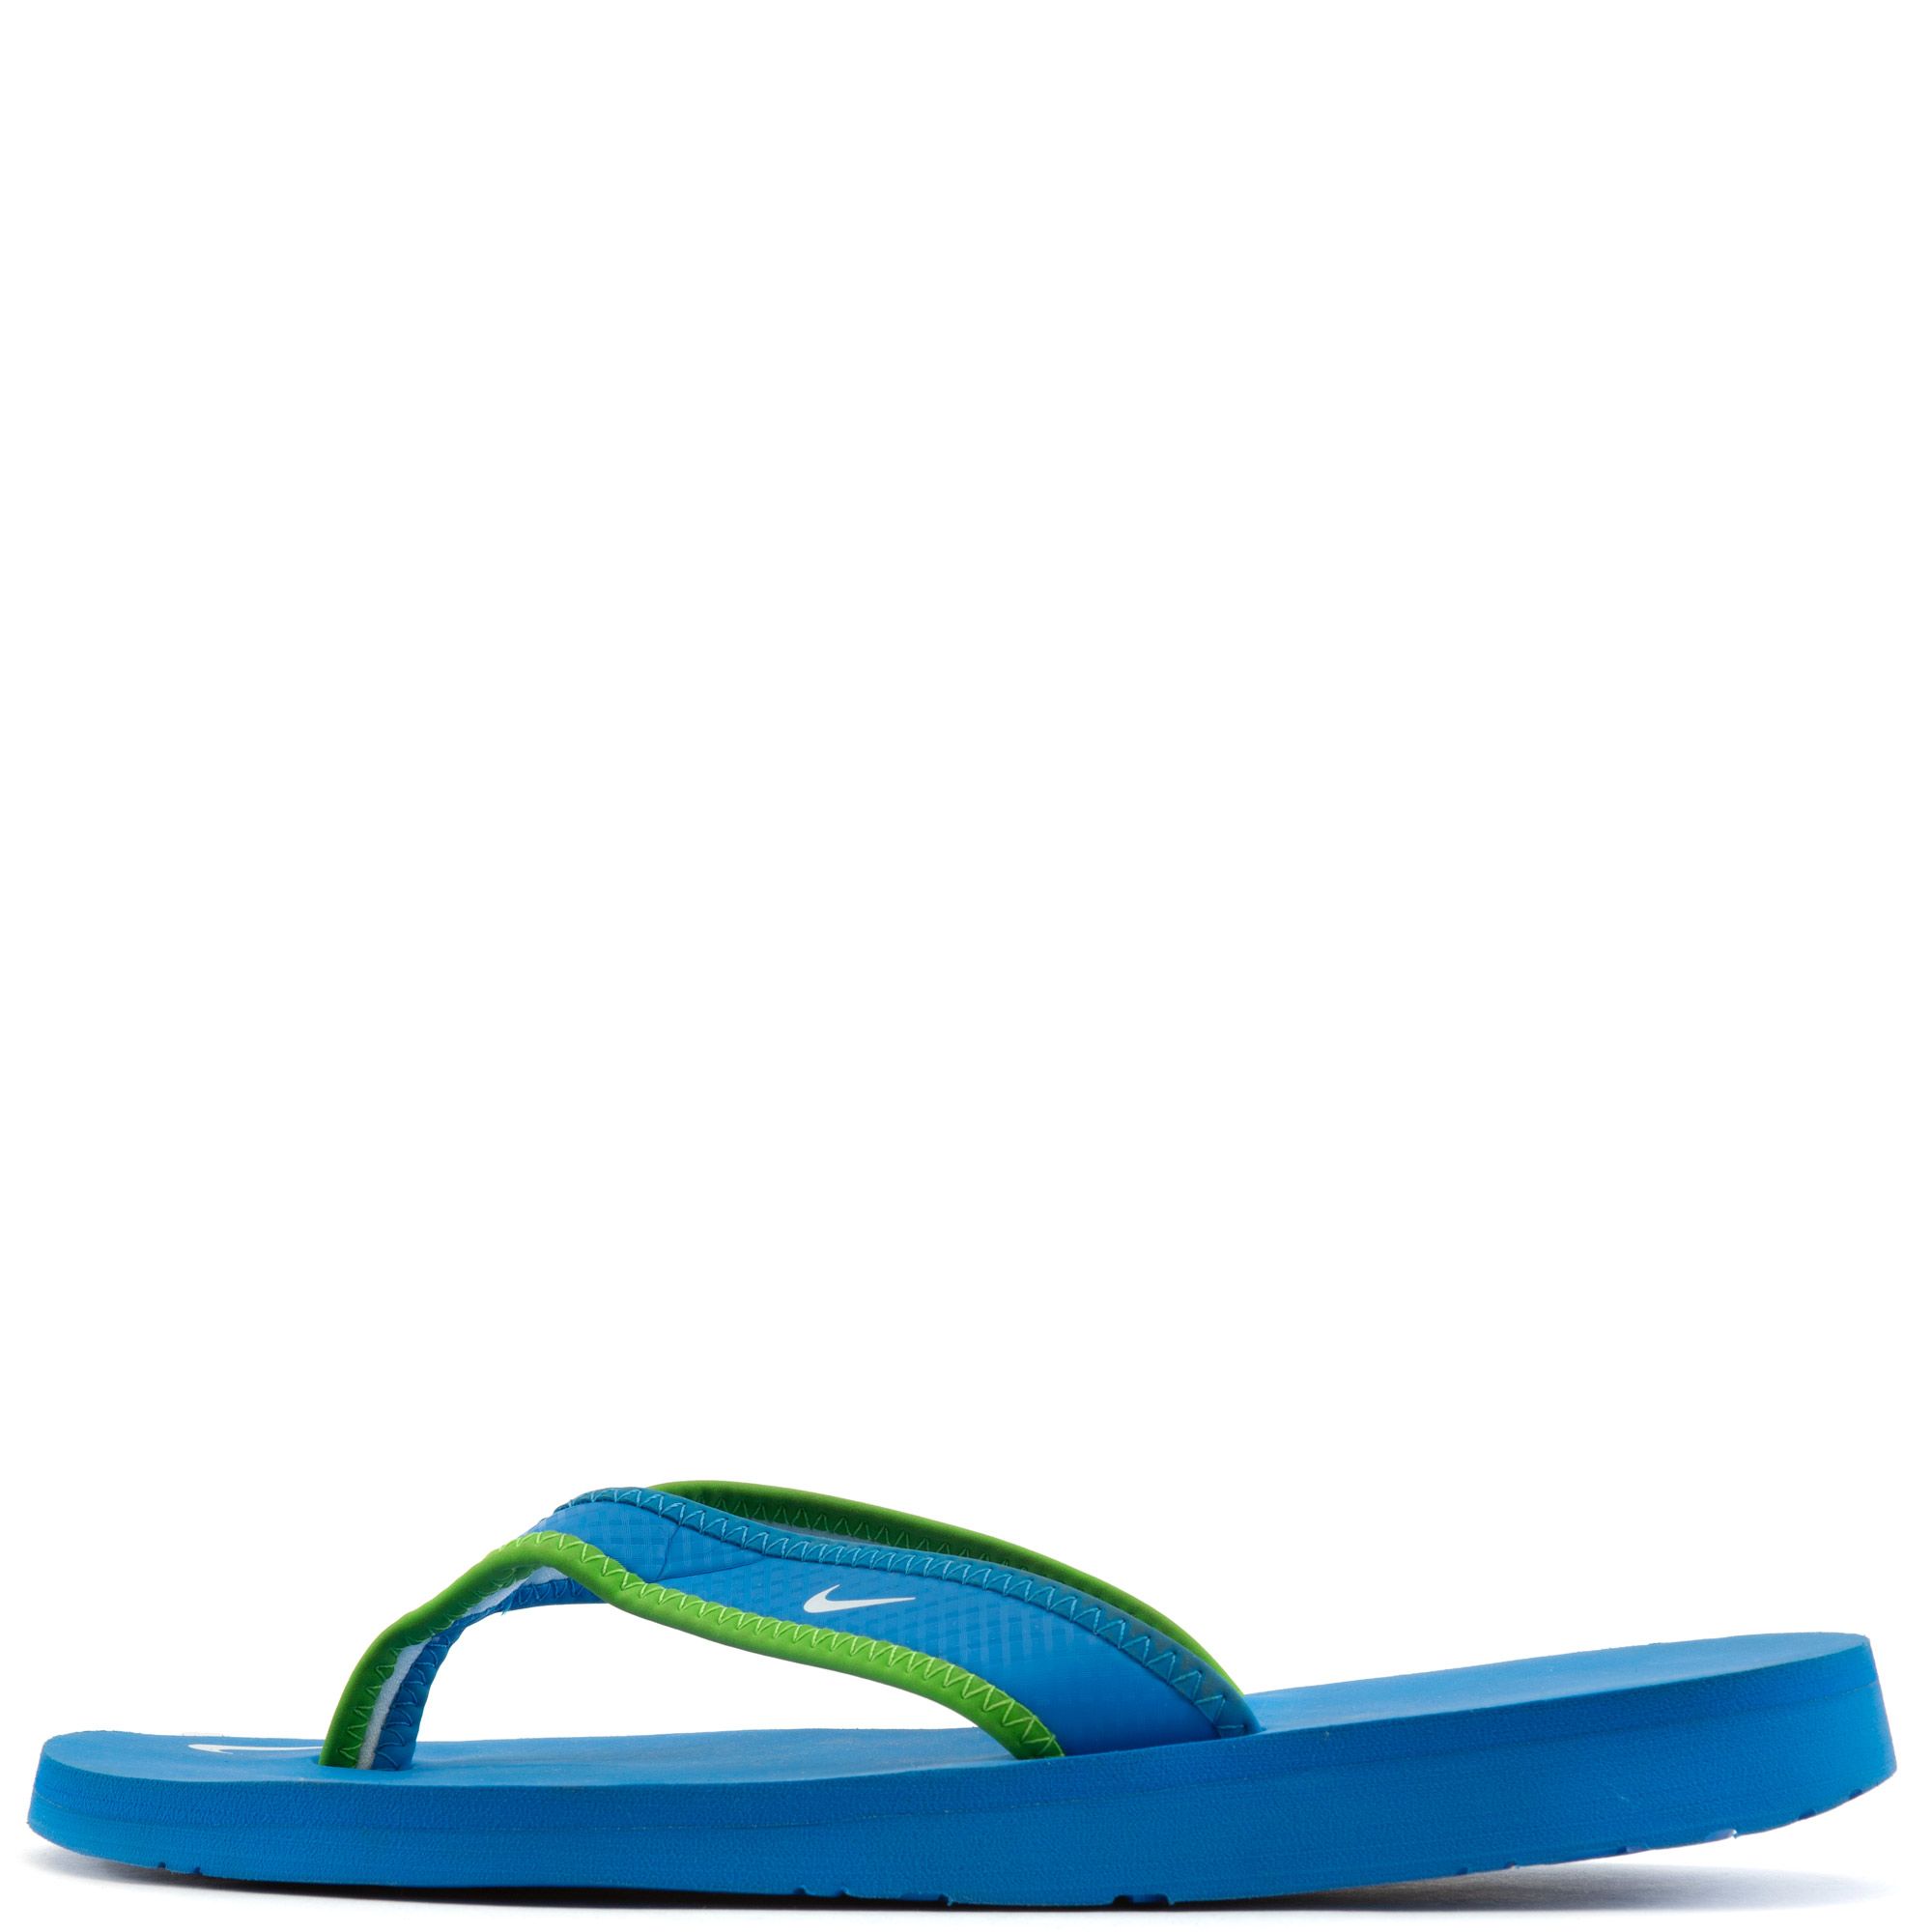 NIKE Celso Thong Sandals 314870 413 - Shiekh